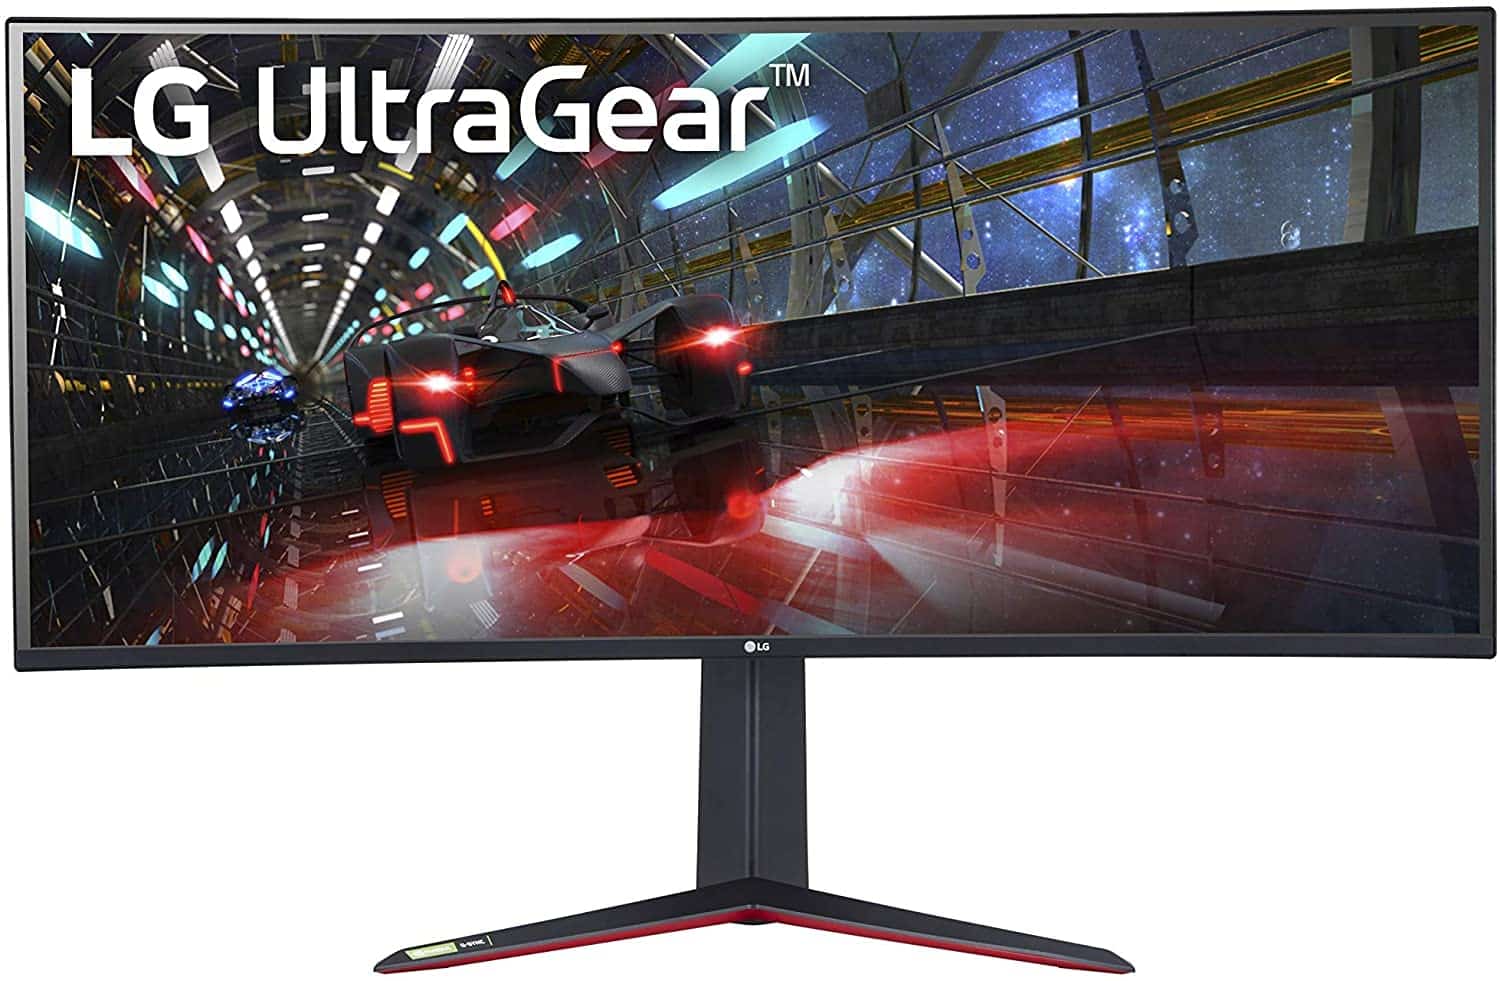 LG UltraGear 38GN950 - The best gaming moniter overall